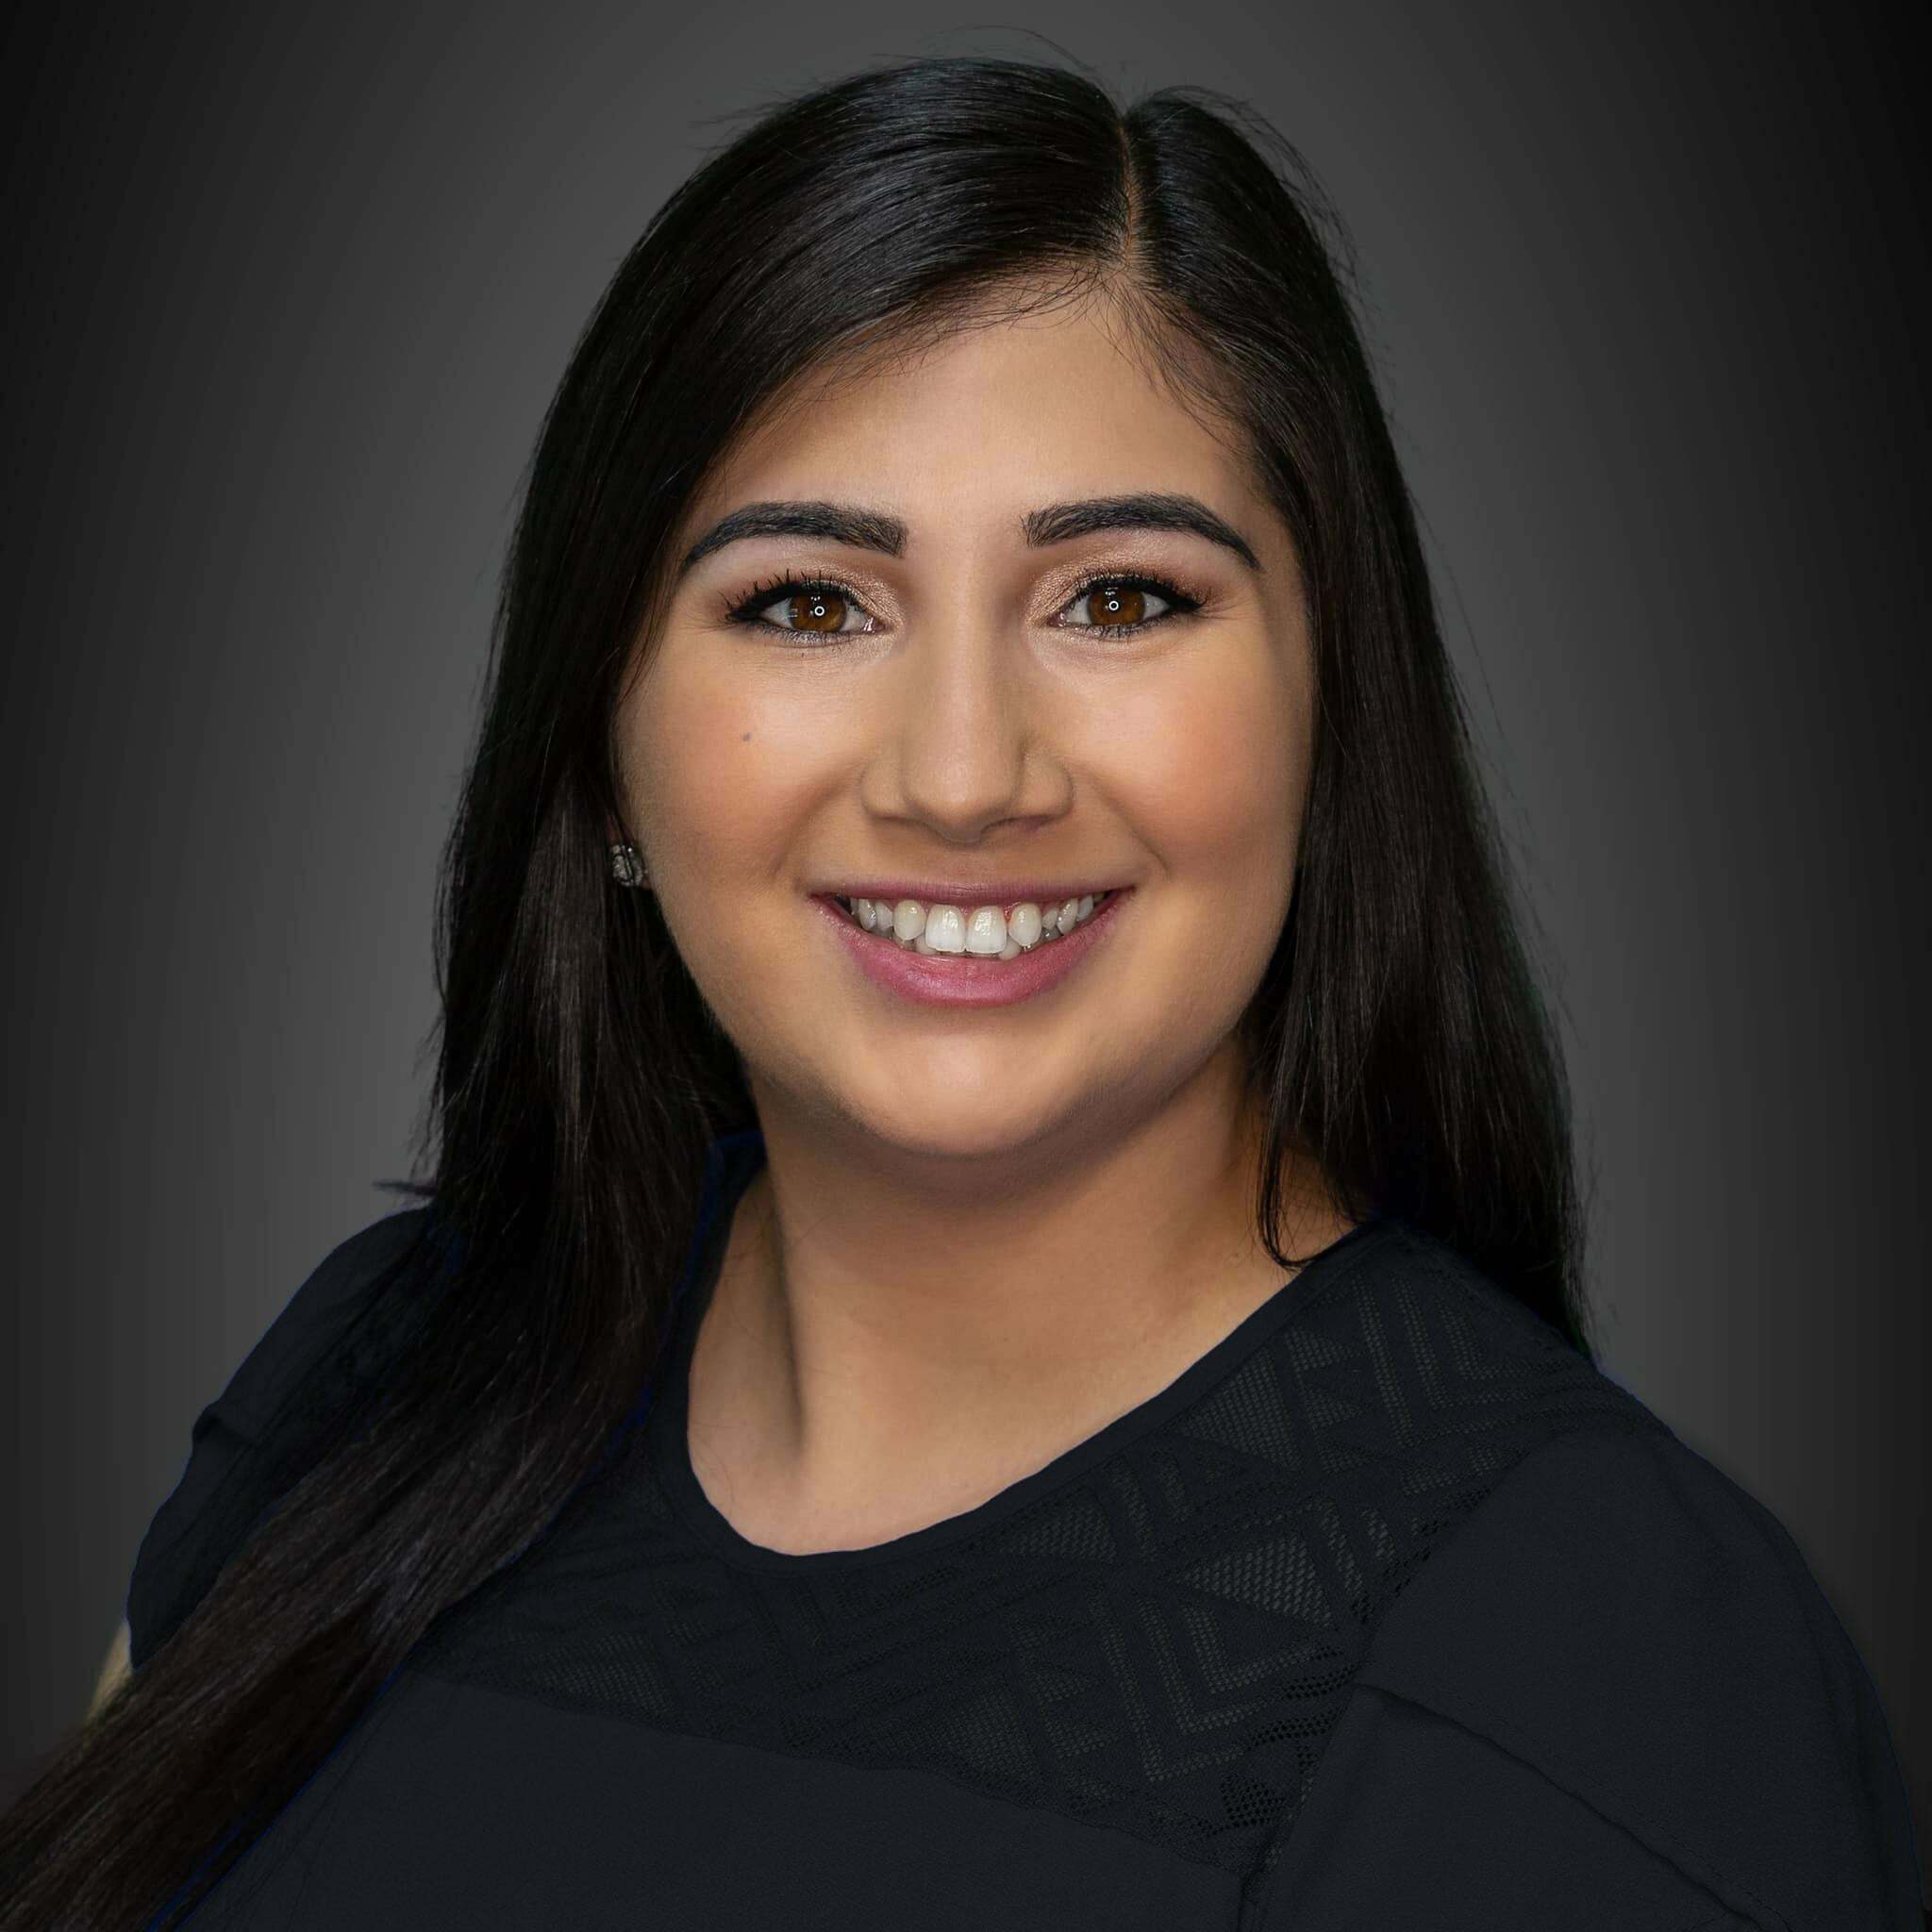 Brittany Zamora, Real Estate Salesperson in Roseville, Reliance Partners